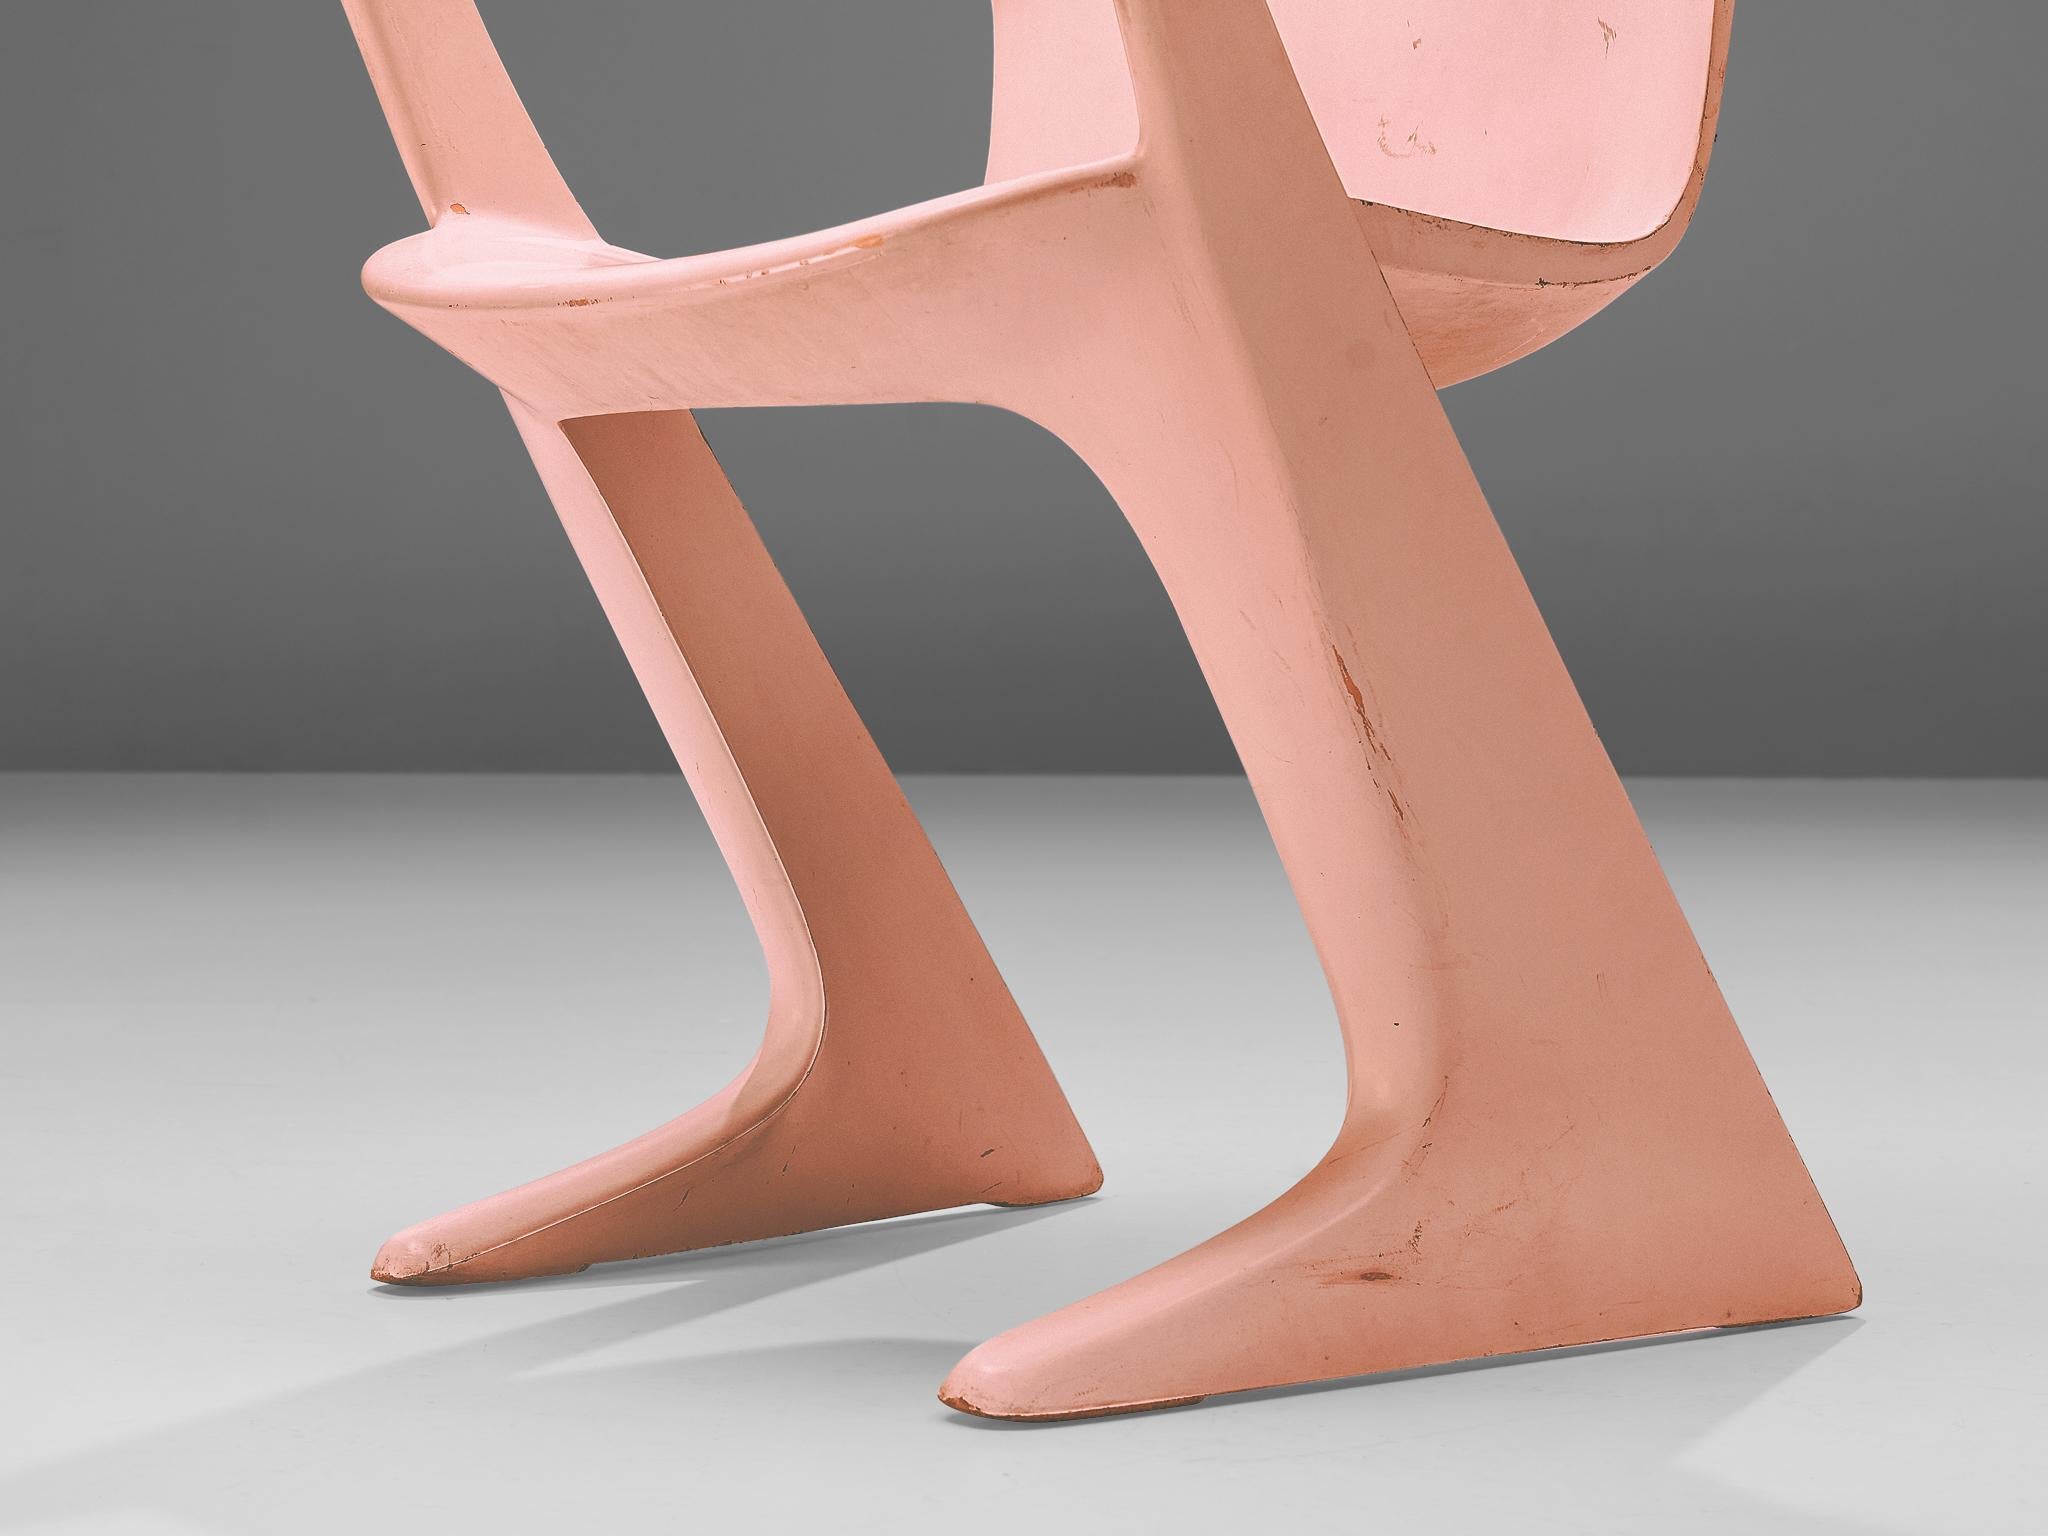 Ernst Moeckl 'Kangaroo' Dining Chairs in Soft Pink In Good Condition For Sale In Waalwijk, NL